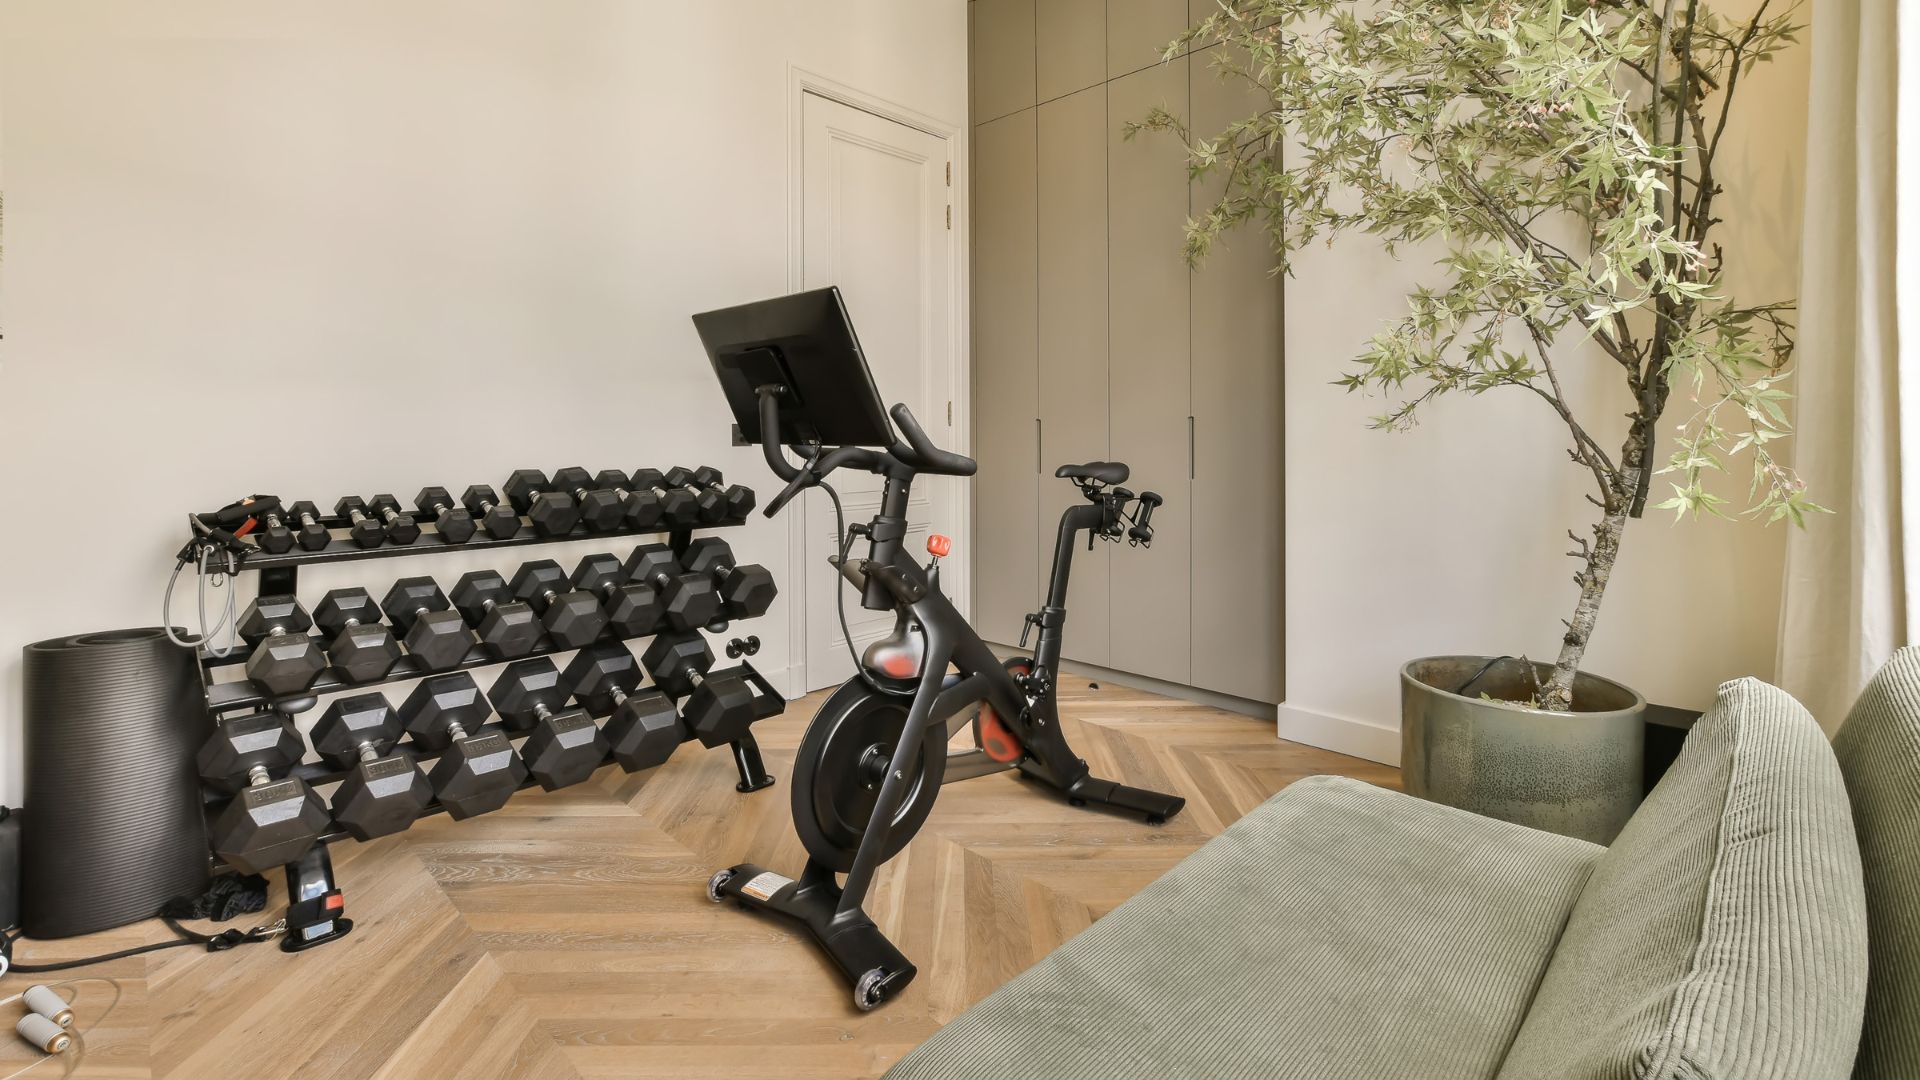 Basement Gym room with weightlifting materials and stationary exercise bike